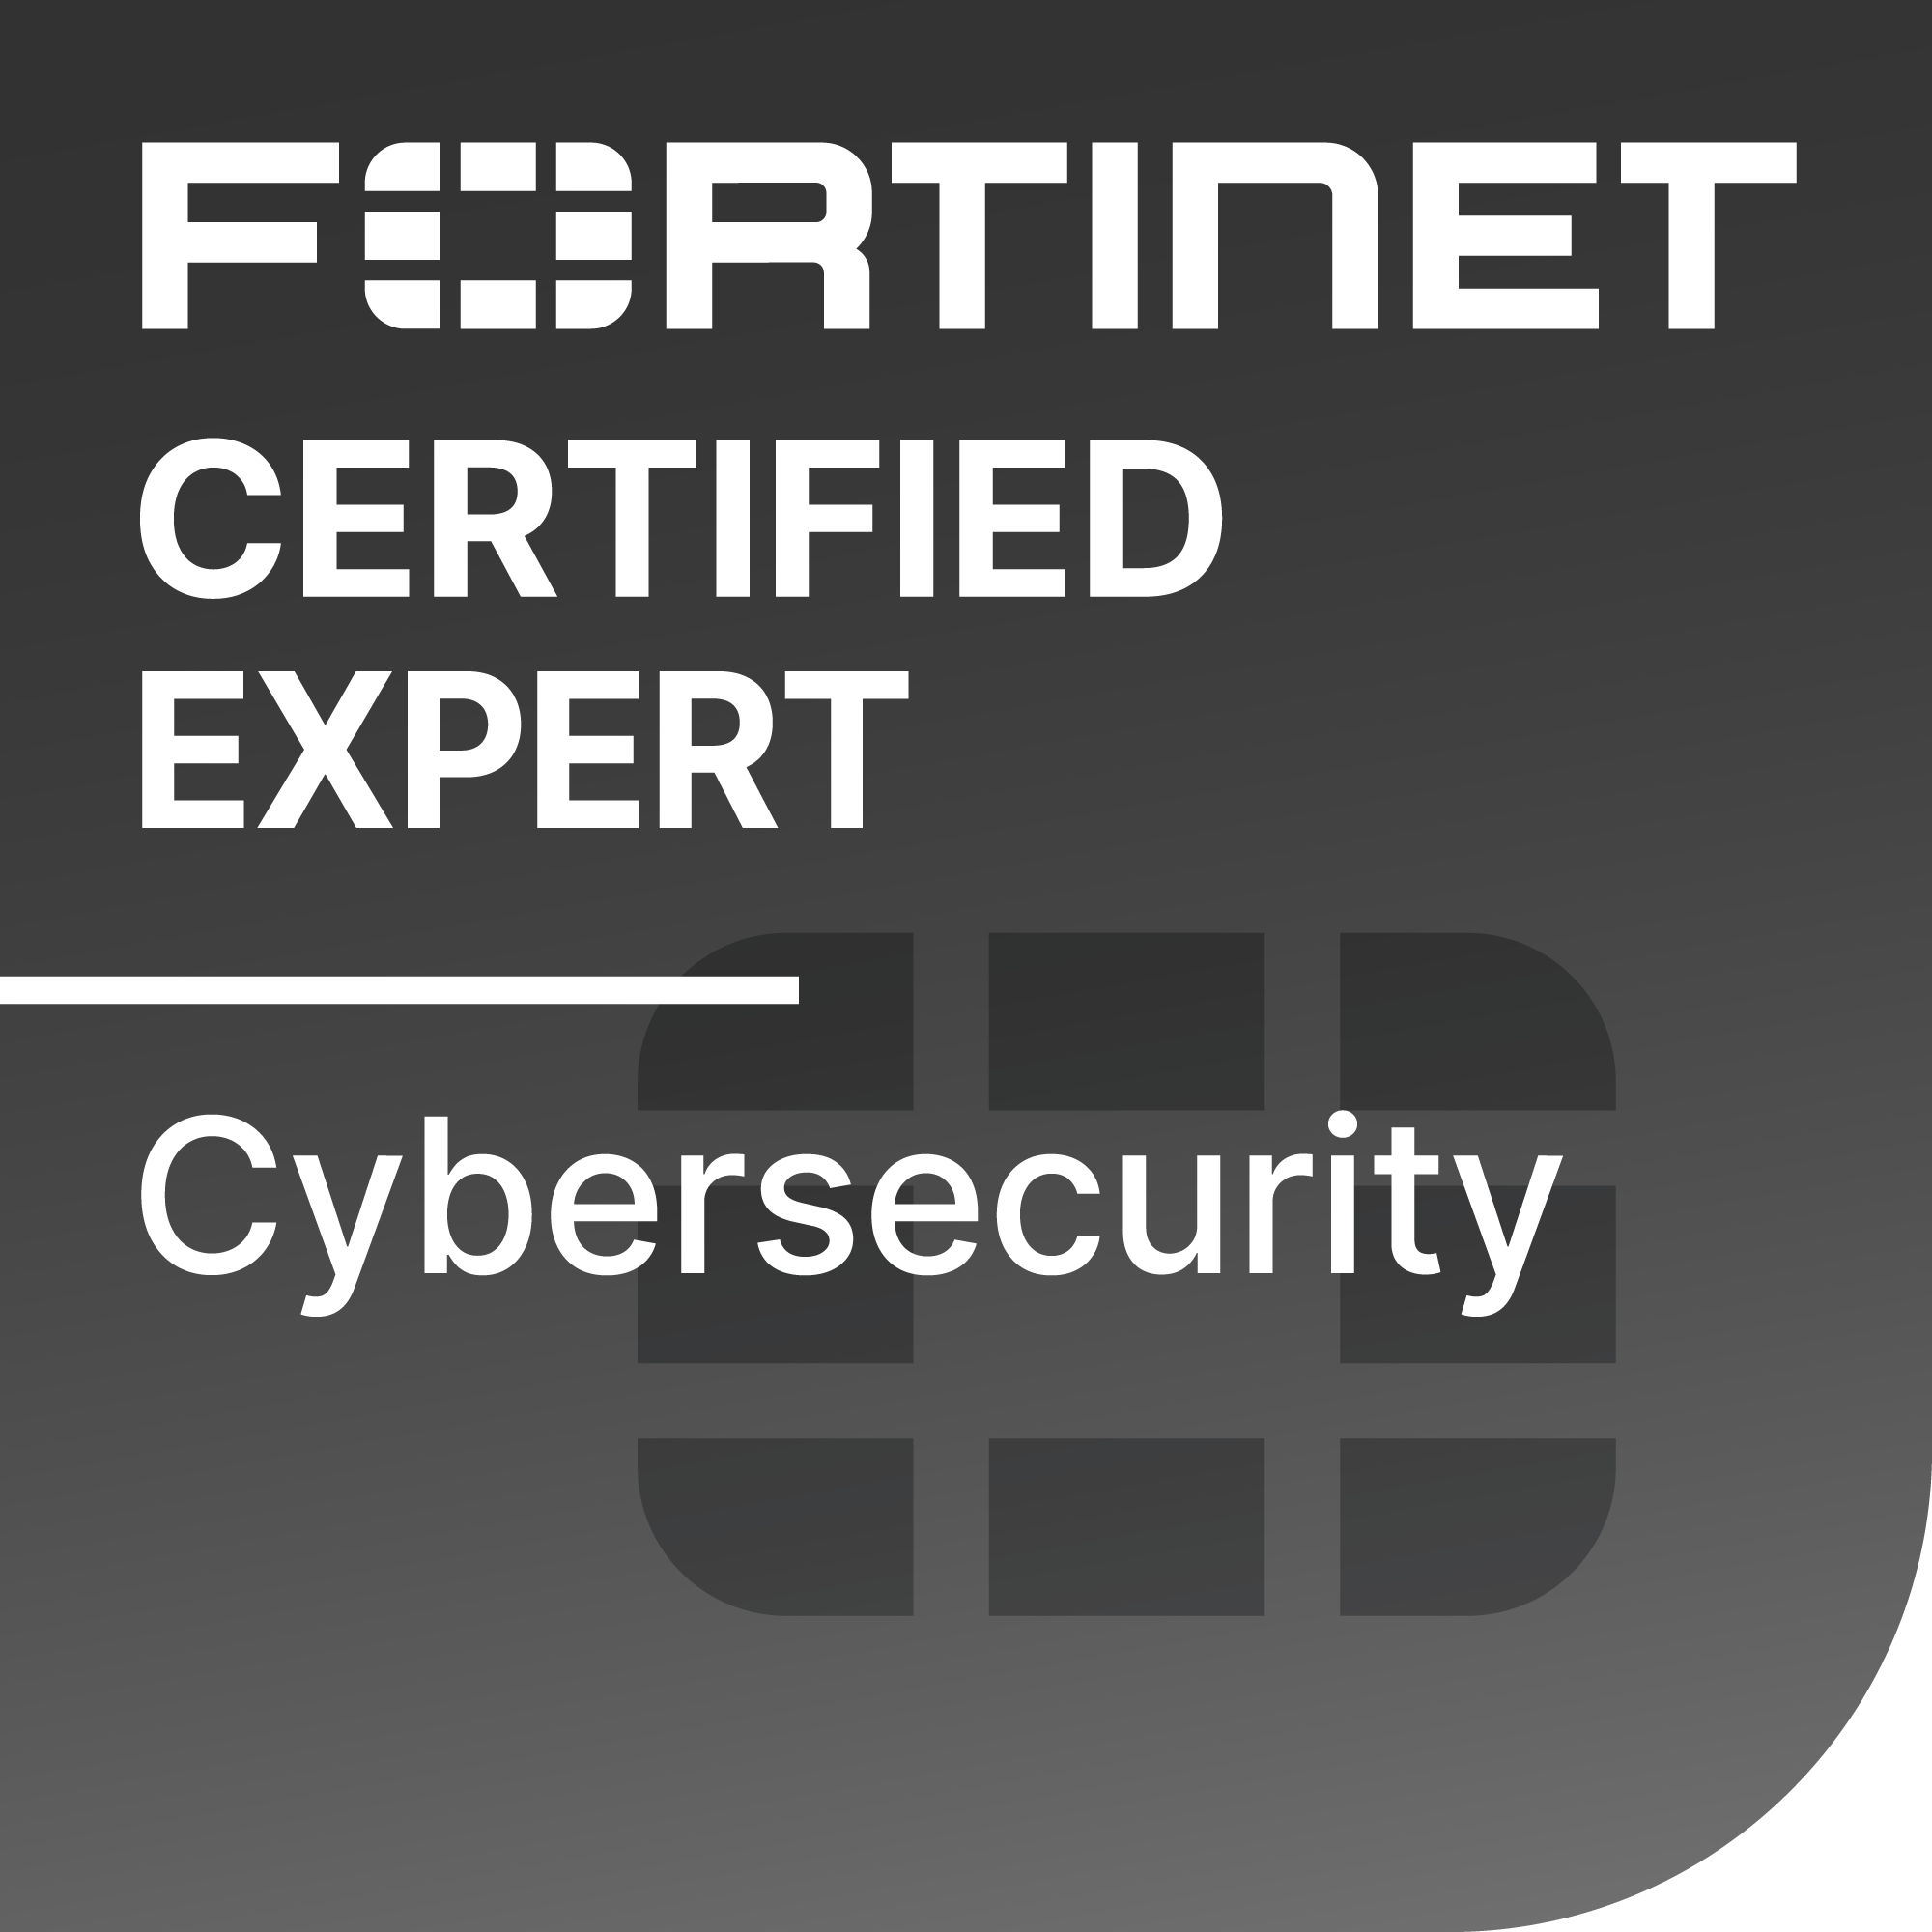 Fortinet Certified Expert badge